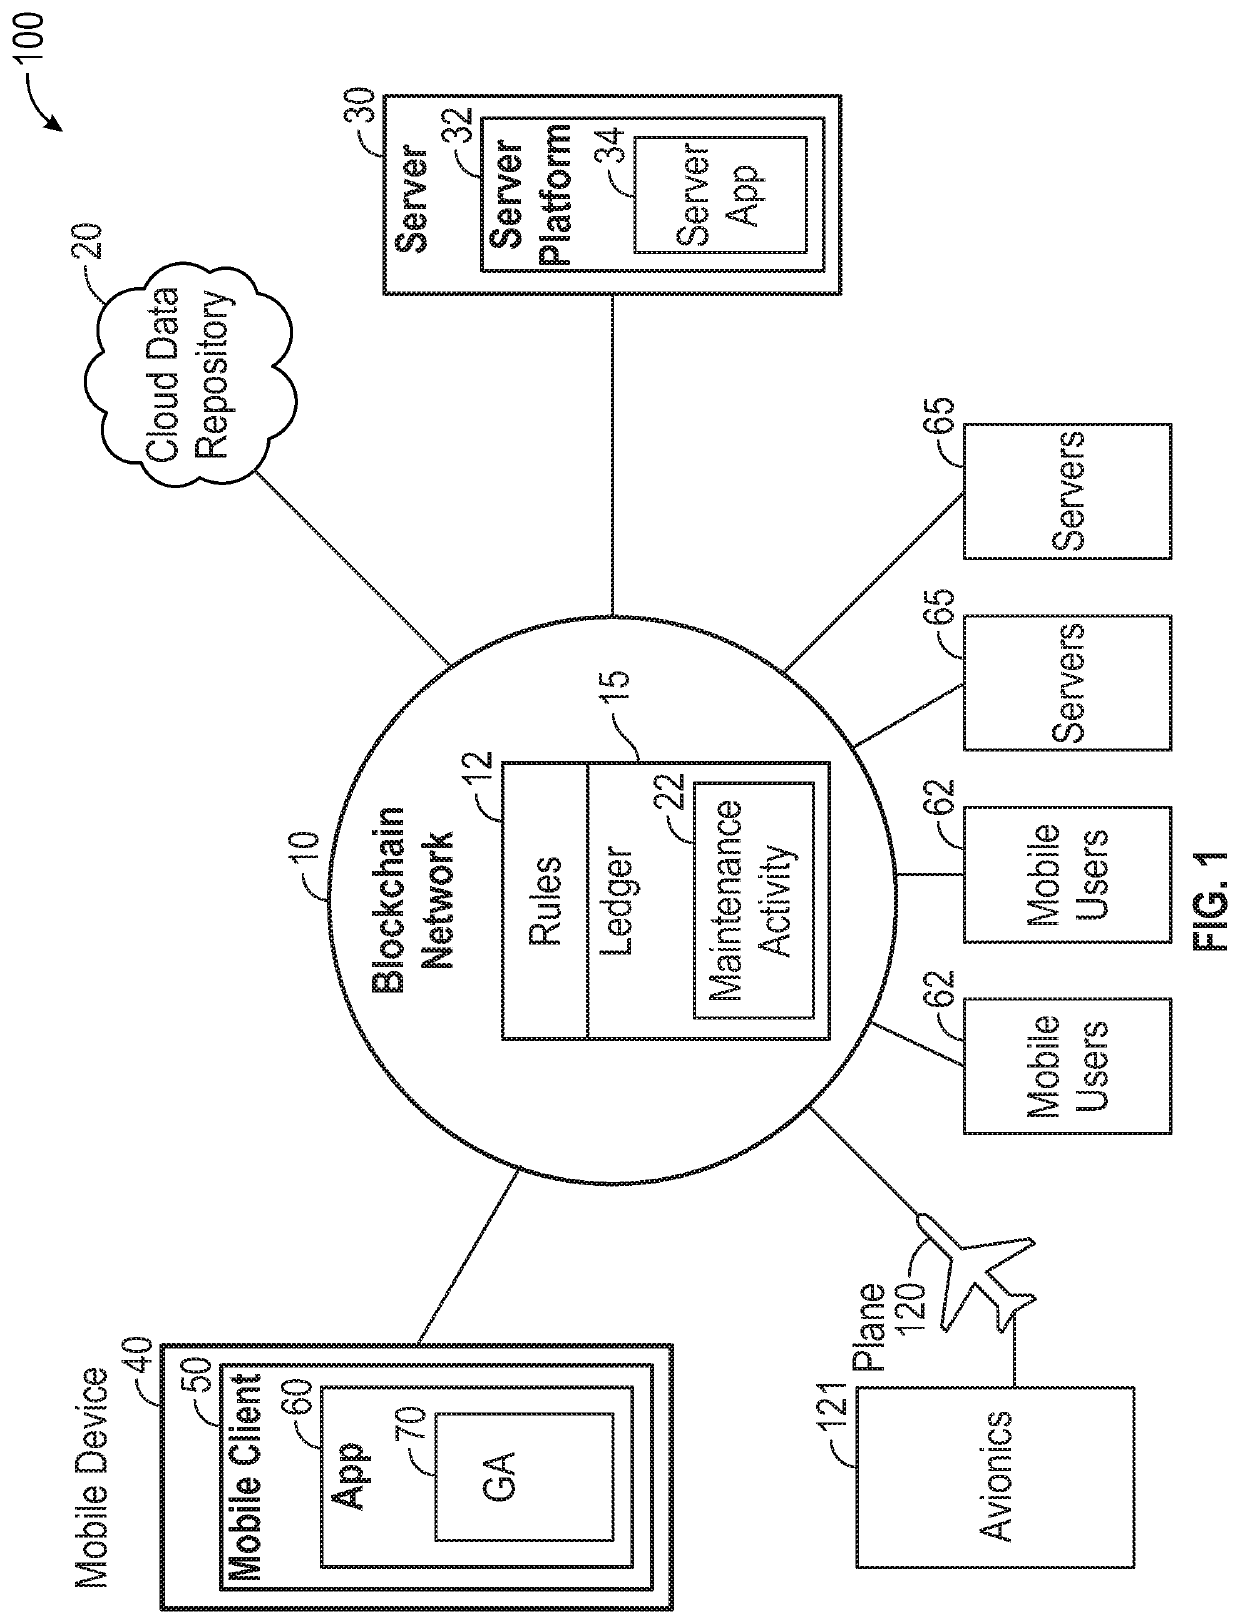 Block chain based system and method for improving aircraft maintenance services